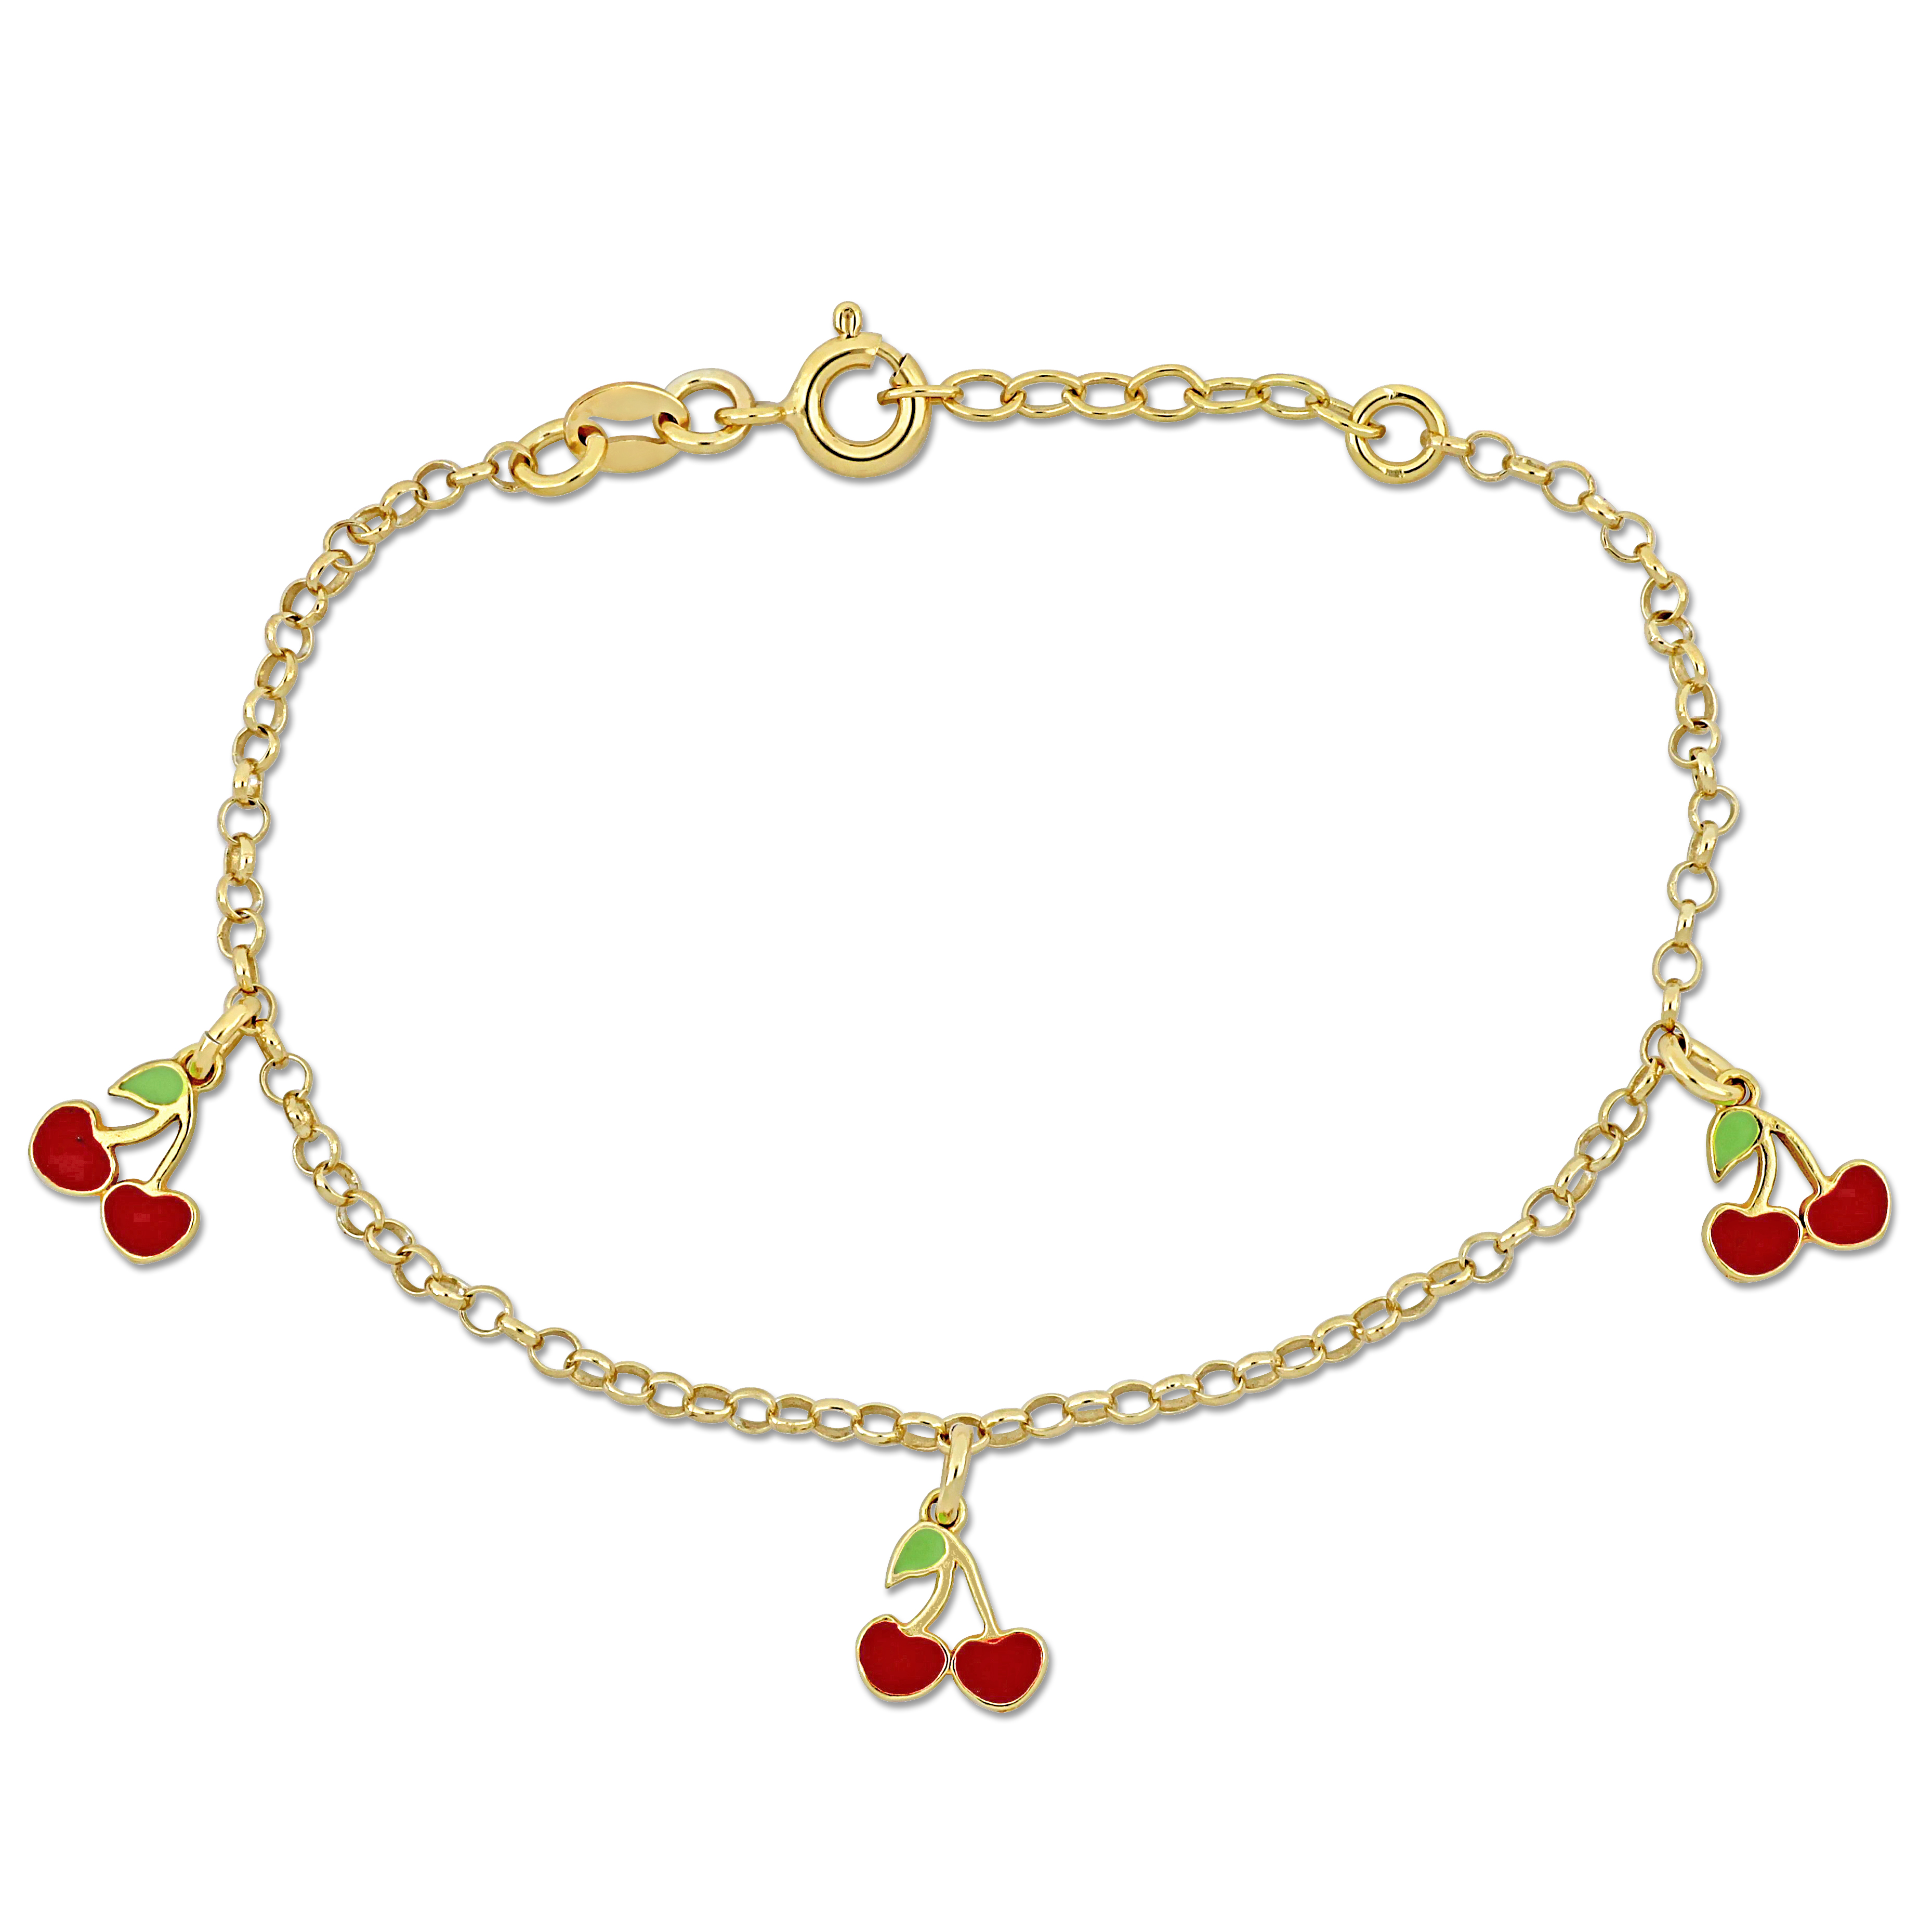 White and Red Enamel Cherry Charm Link Bracelet in Yellow Plated Sterling Silver - 6.5+1 in.